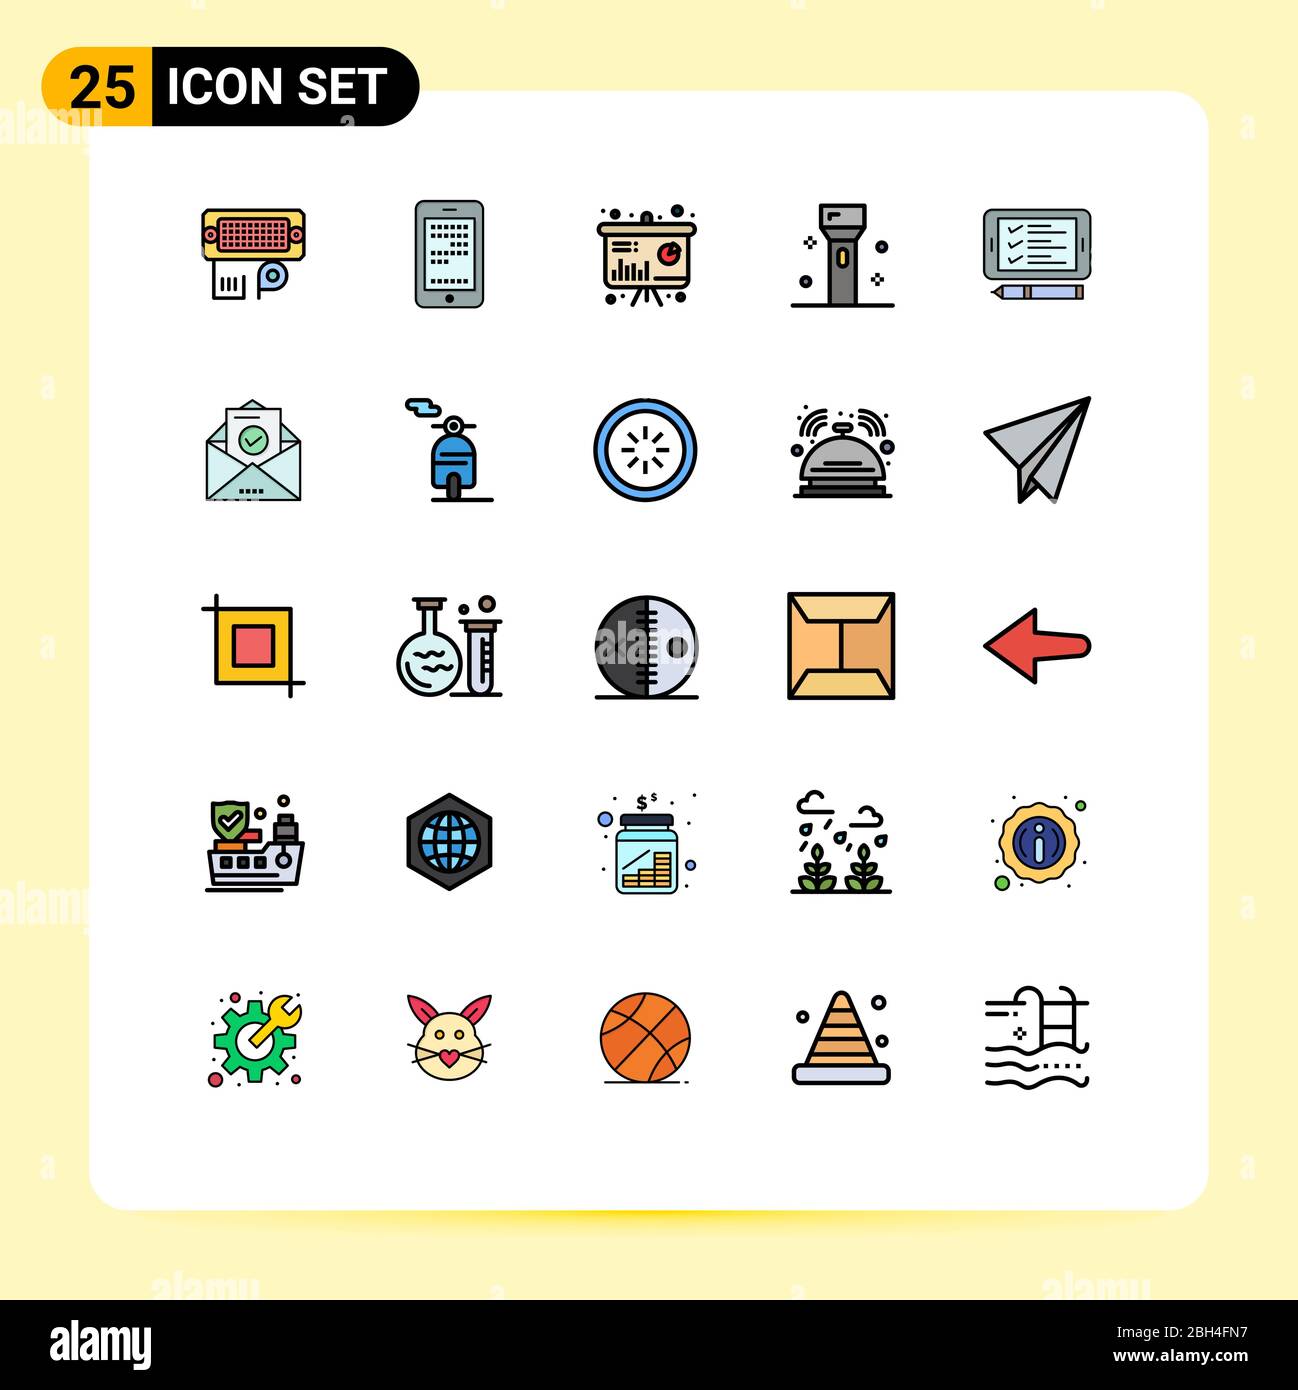 Set of 25 Modern UI Icons Symbols Signs for phone, products, chart, flashlight, devices Editable Vector Design Elements Stock Vector